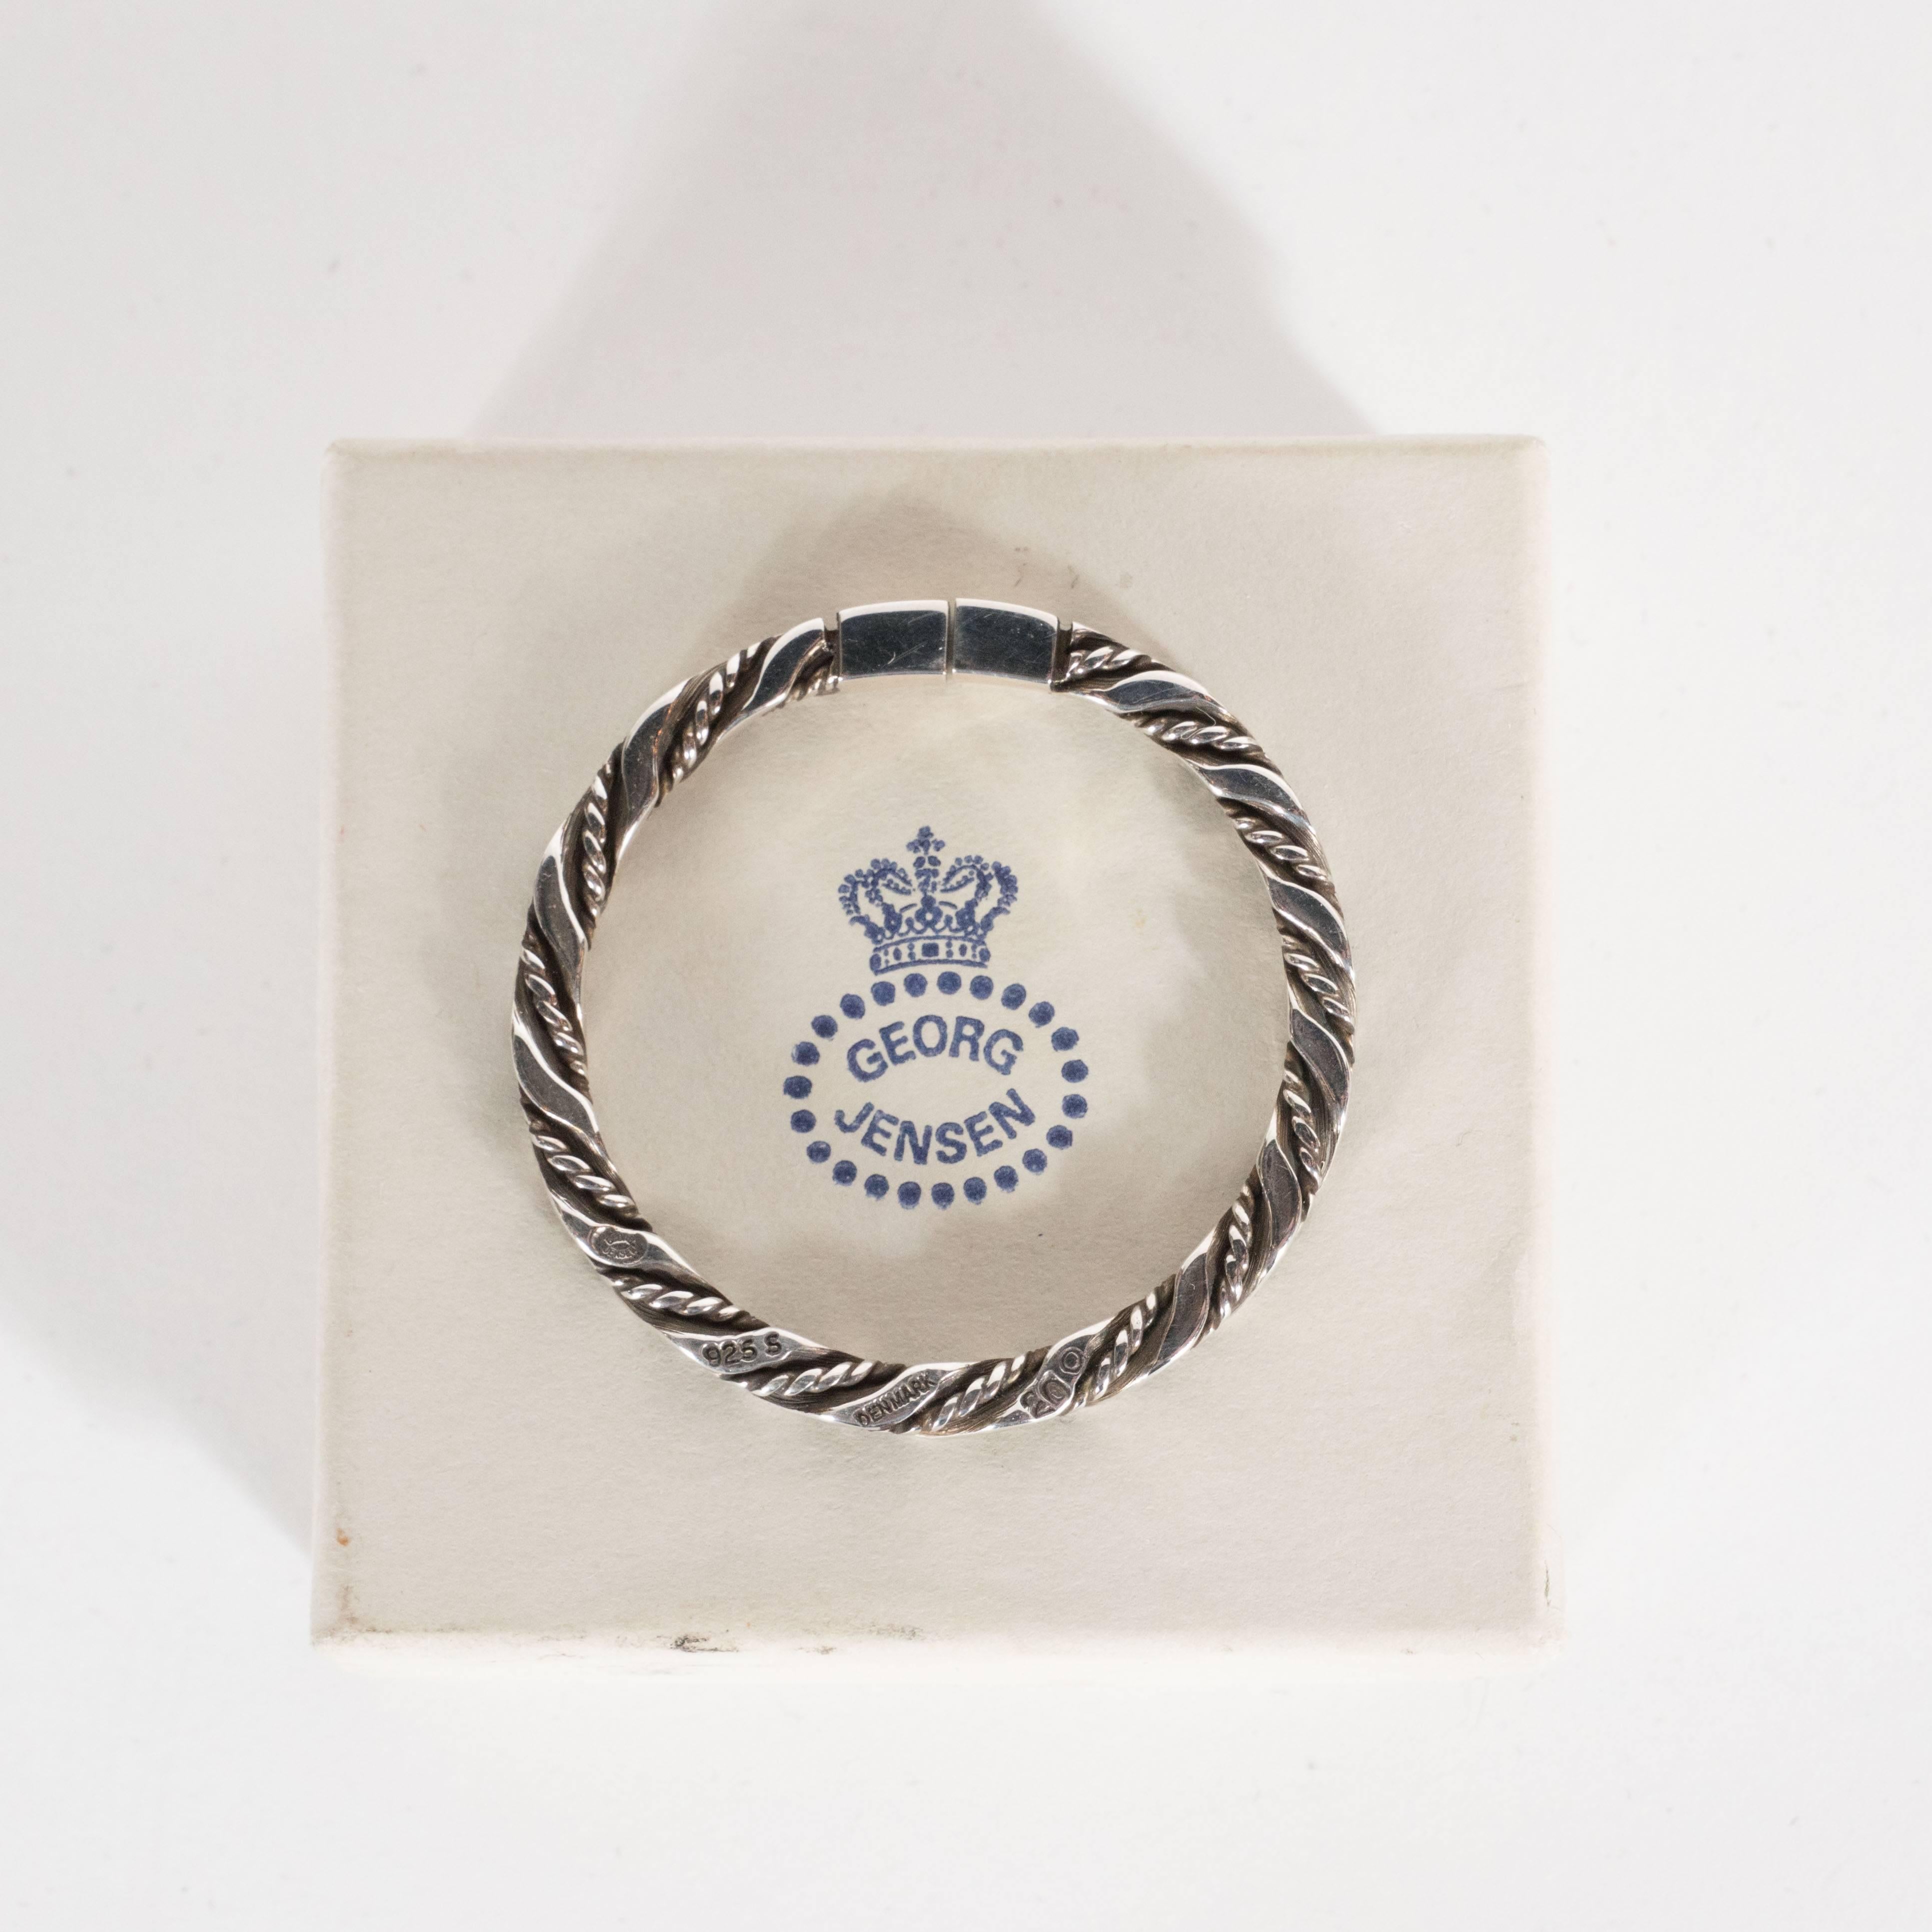 This elegant key ring was realized circa 1960 by the esteemed Danish silversmith Georg Jensen. Consisting of a simple circular form with a repeating braided pattern, this piece embodies the quiet sophistication that collectors of Jensen prize. The